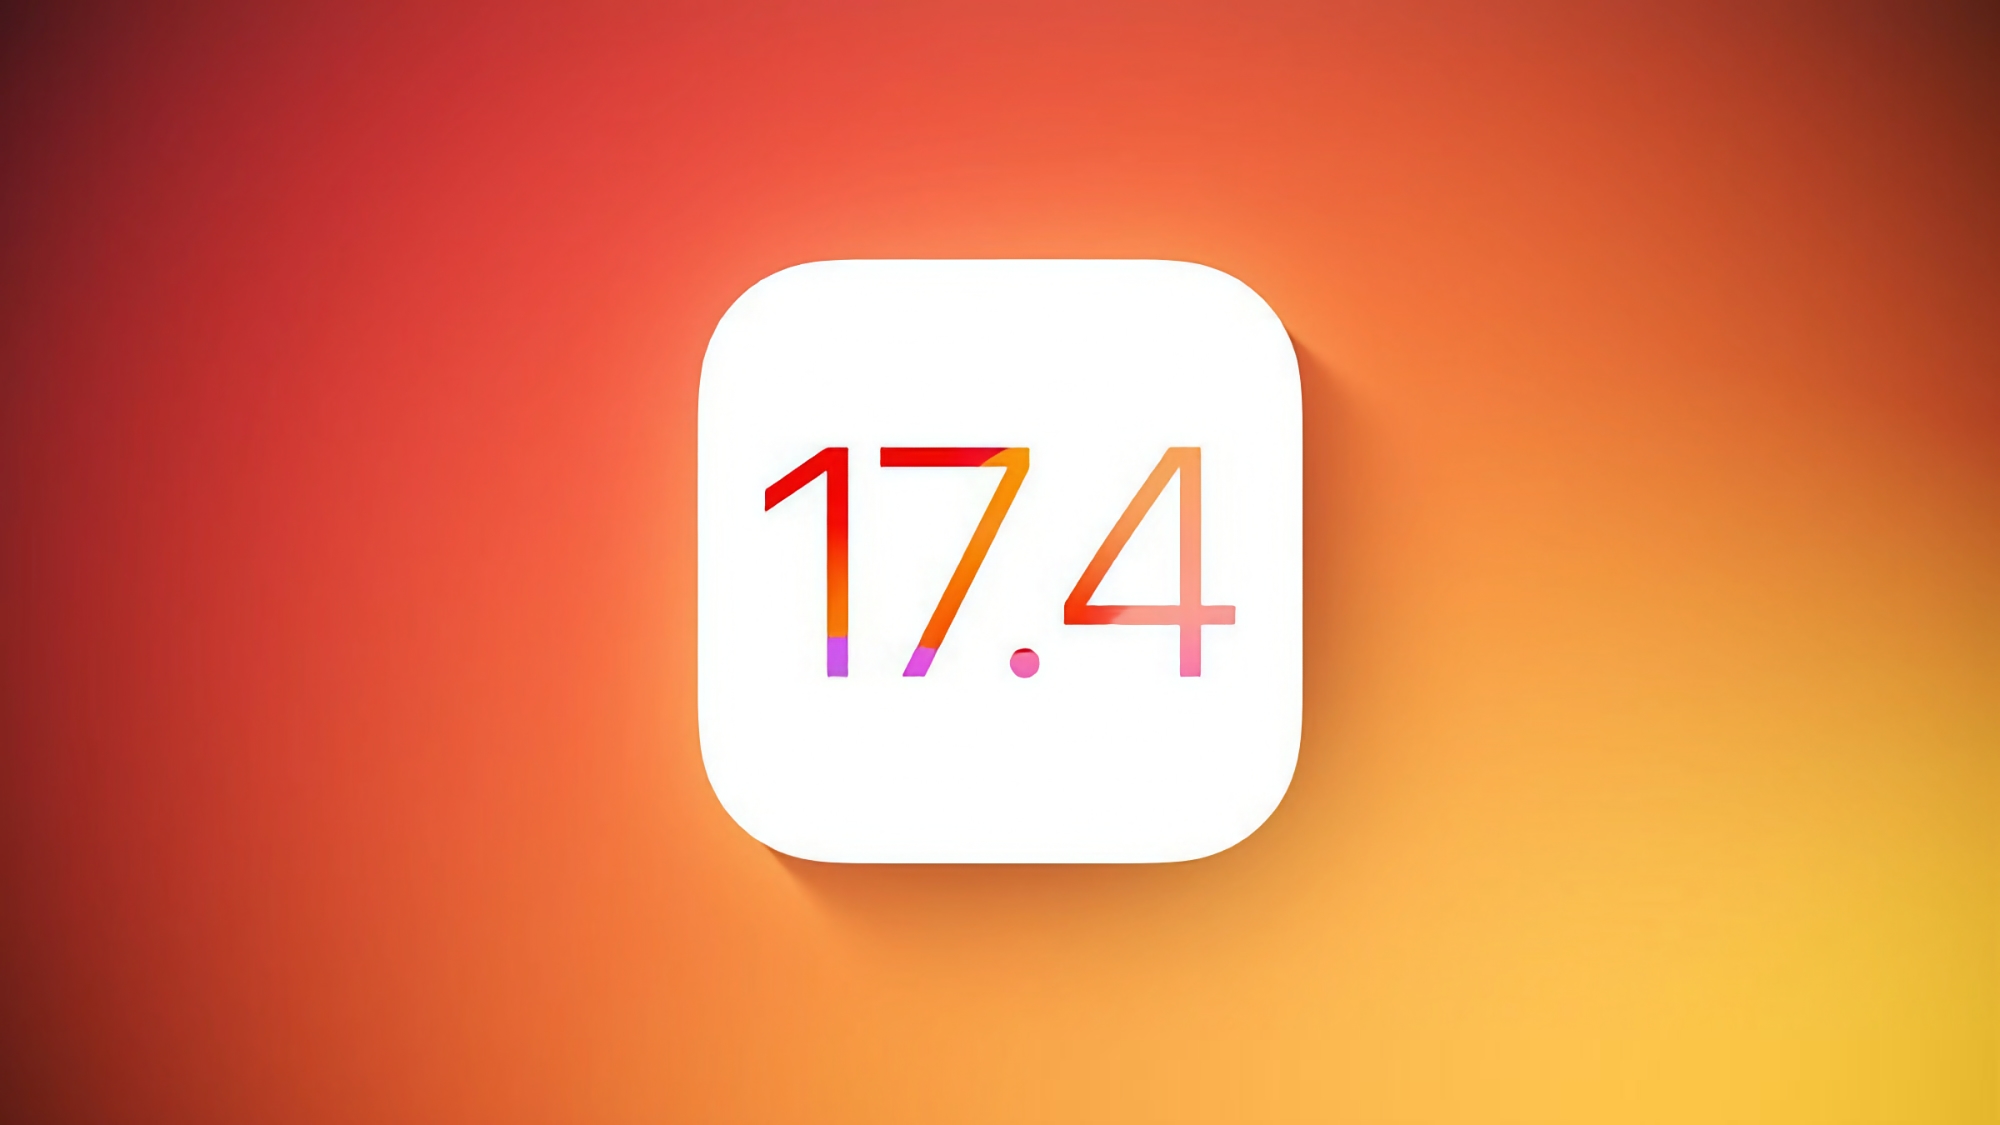 For developers: Apple has released the third beta of iOS 17.4